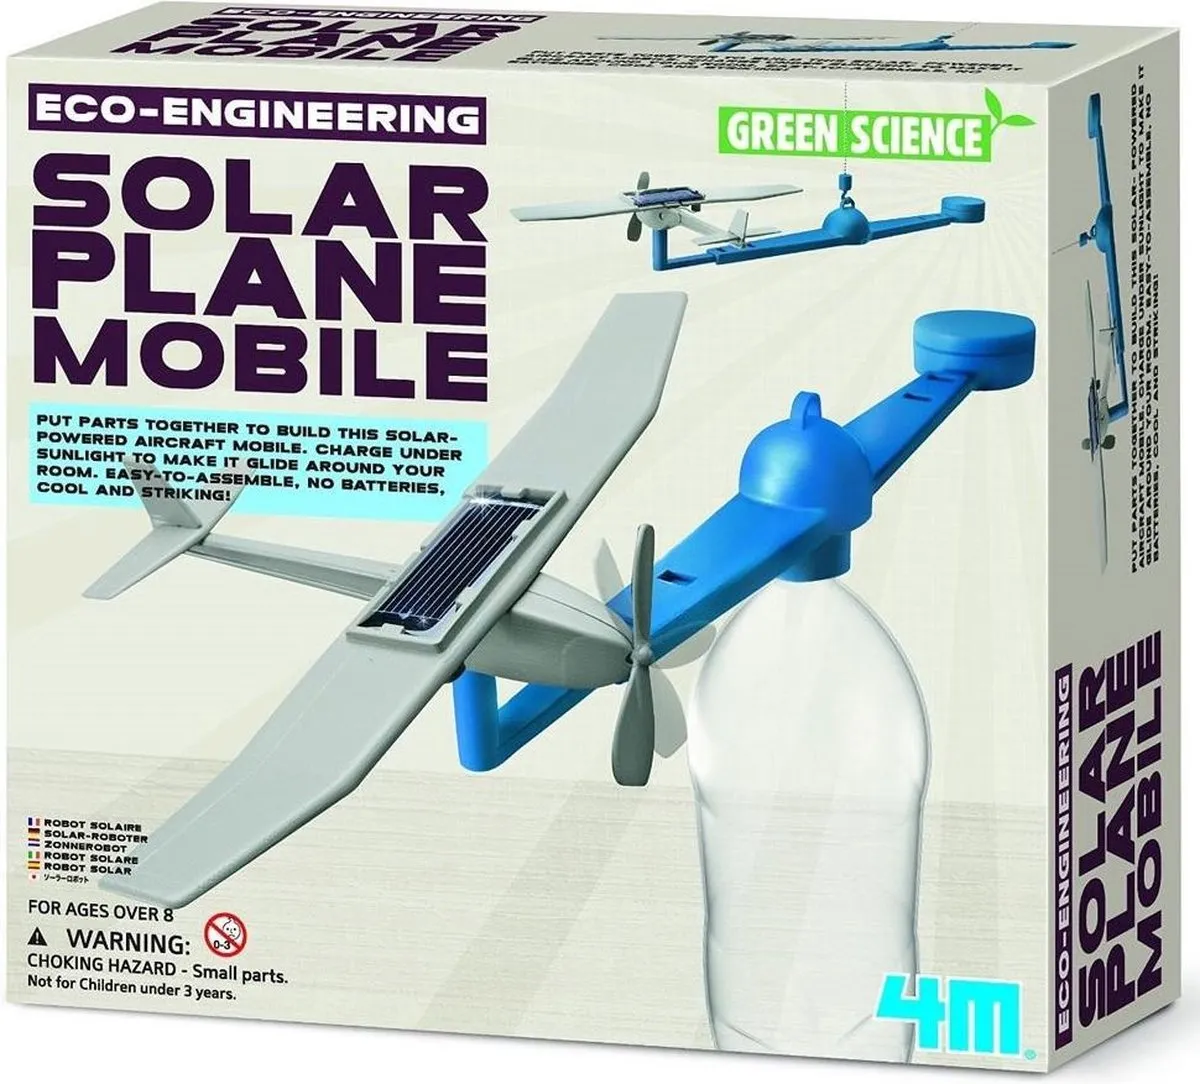 4M - STEAM toys - 4M Green Science Eco-Engineering Solar Plane speelgoed